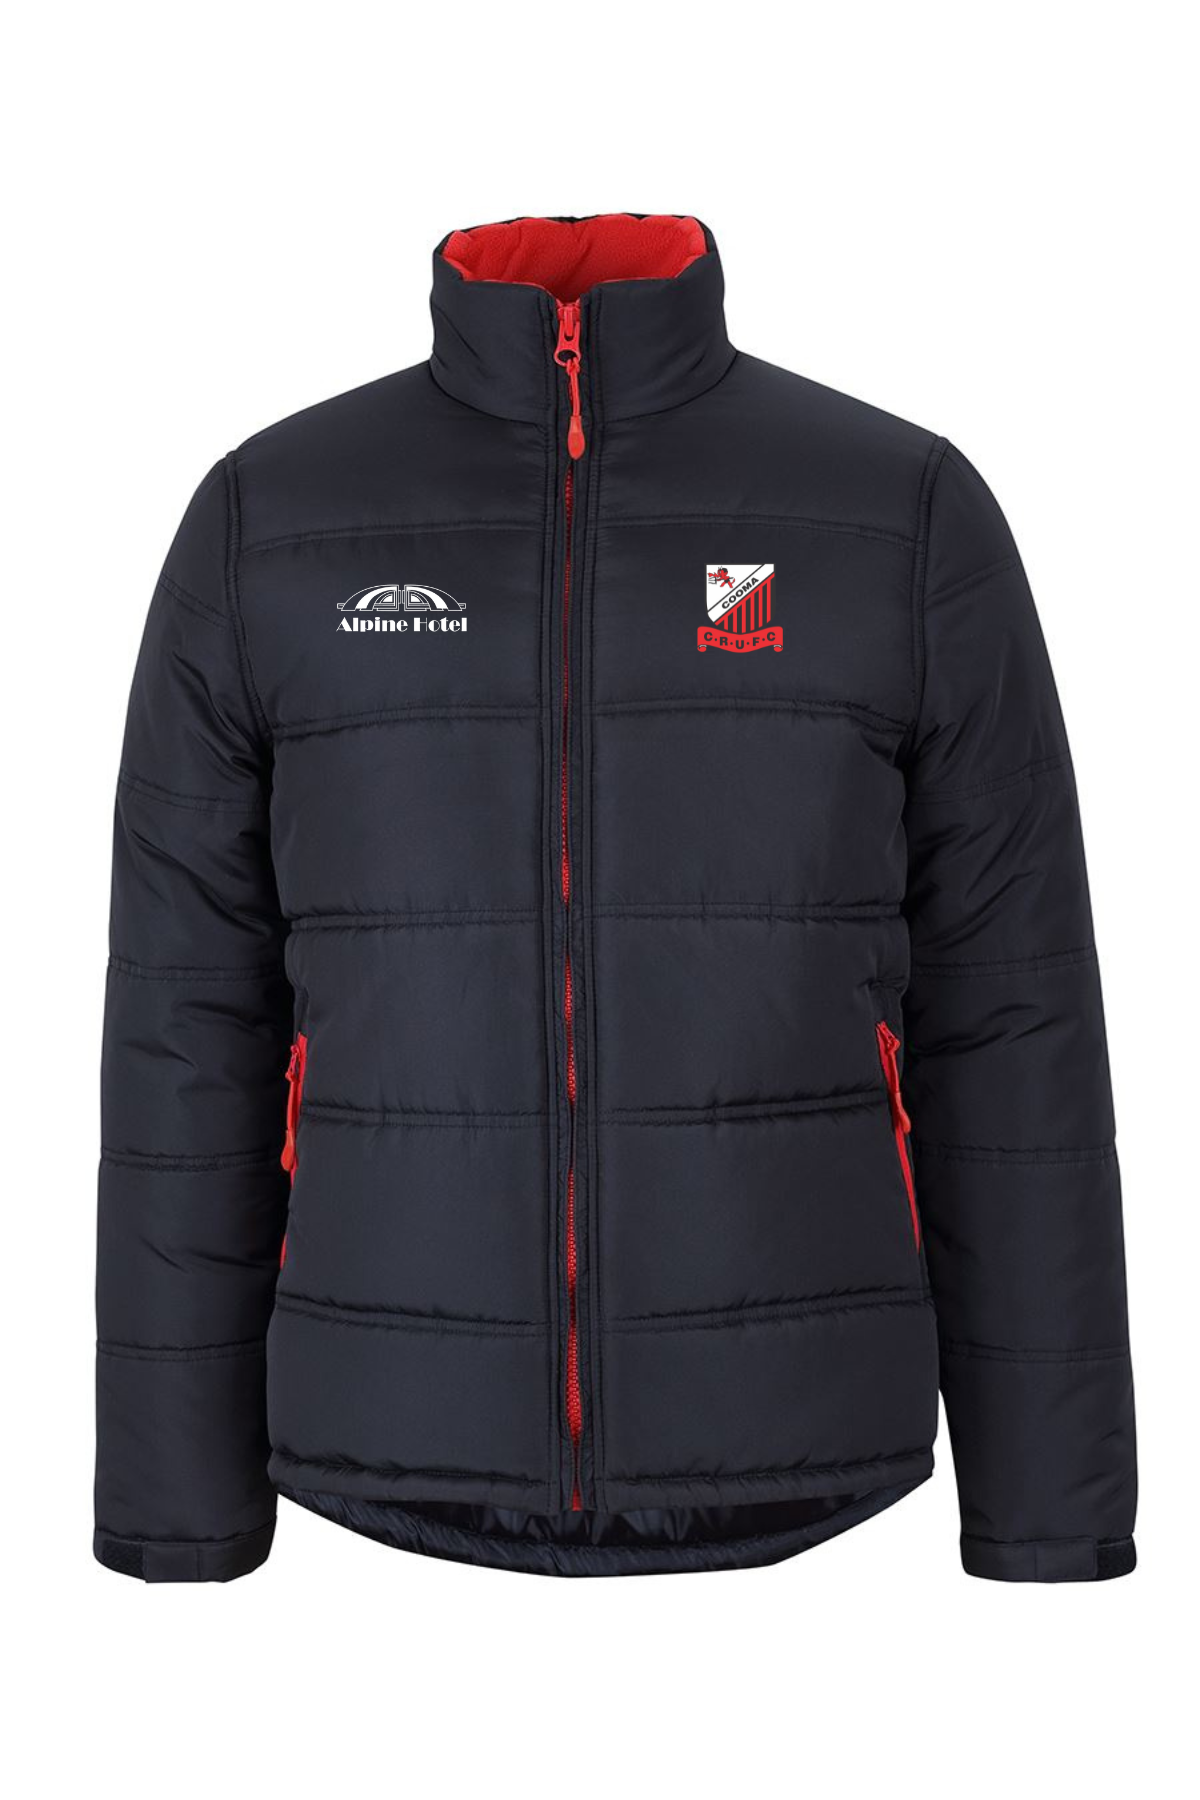 Cooma Rugby Red Devils Puffer Jacket